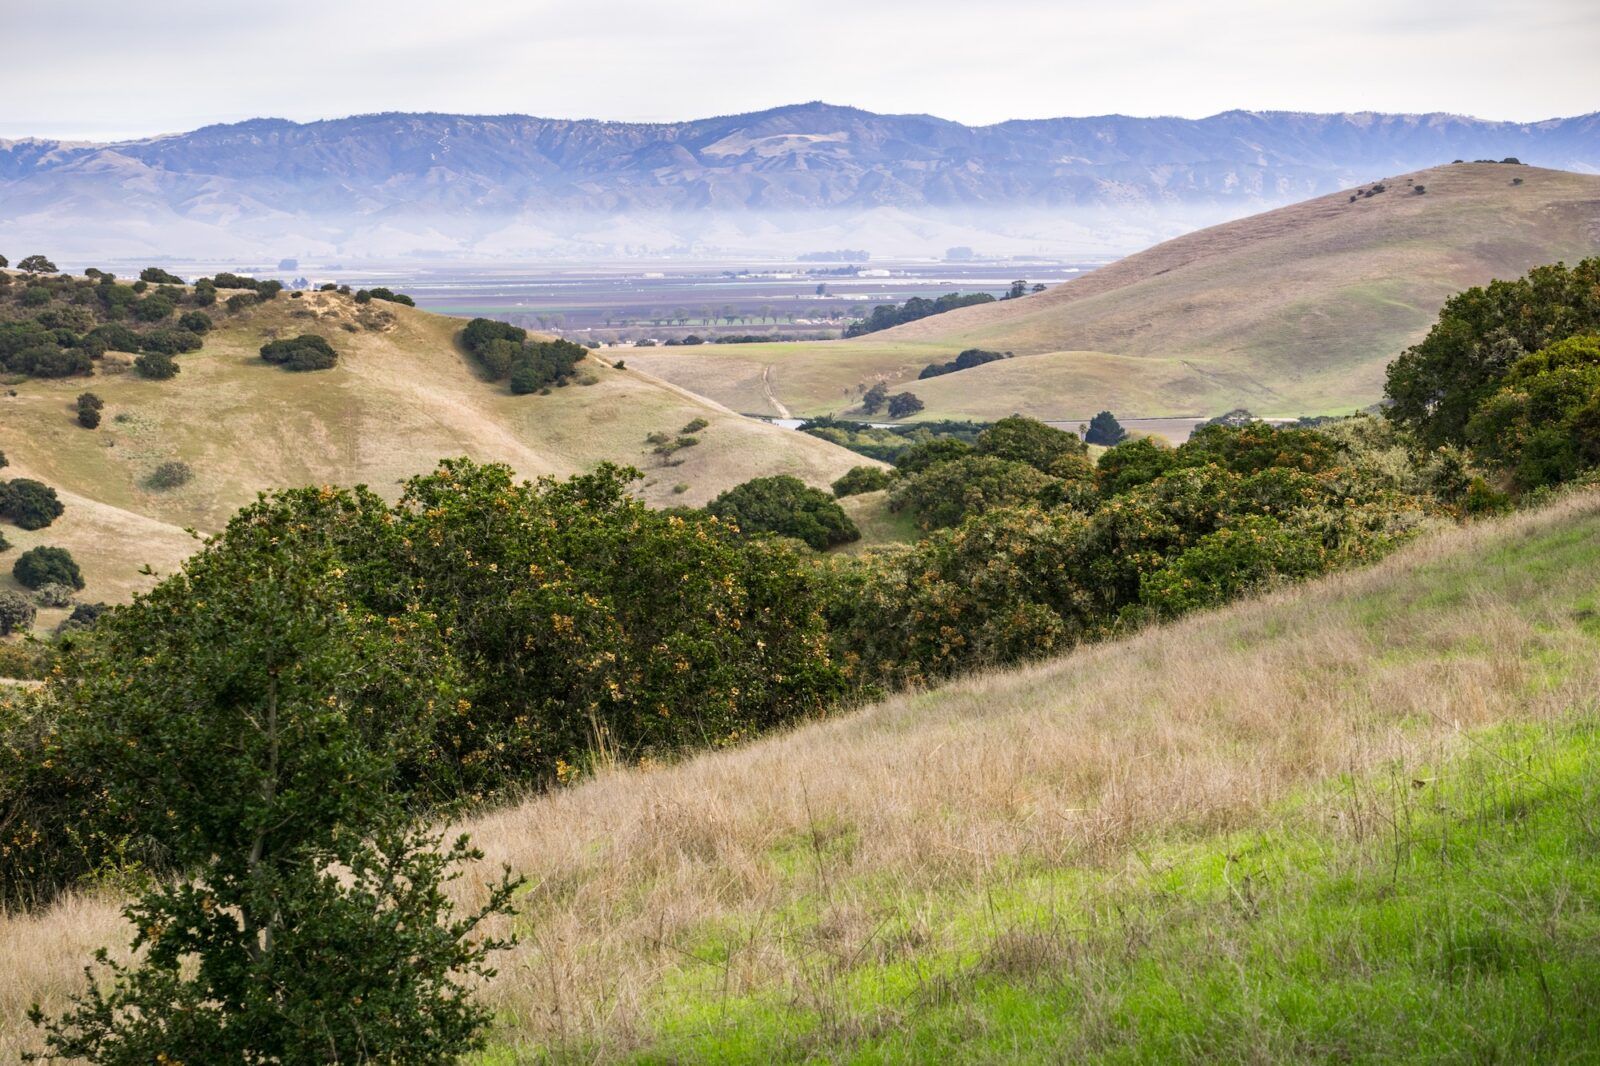 Landscape in Fort Ord National Monument, Salinas, California